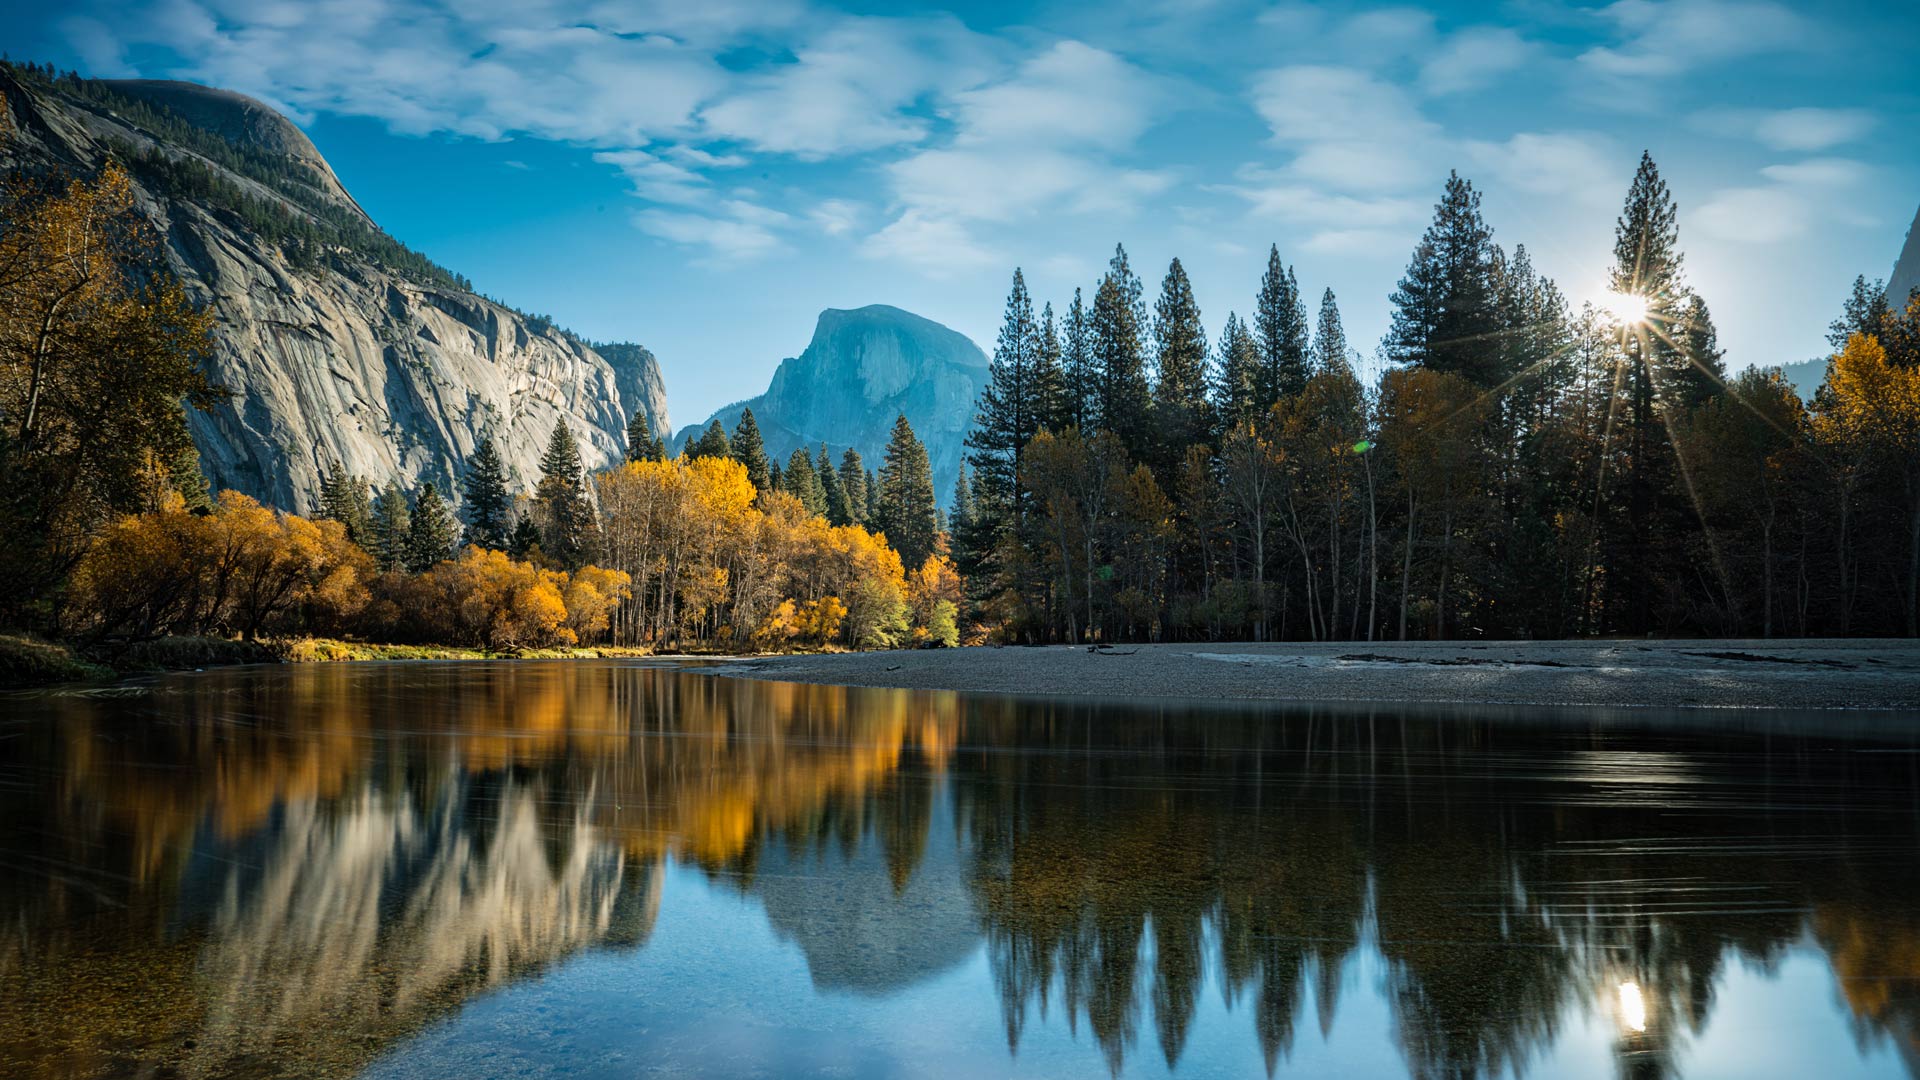 Landscape image of Yosemite Mountains in Autum reflecting on a body of water as sun peaks through the trees in a distance.